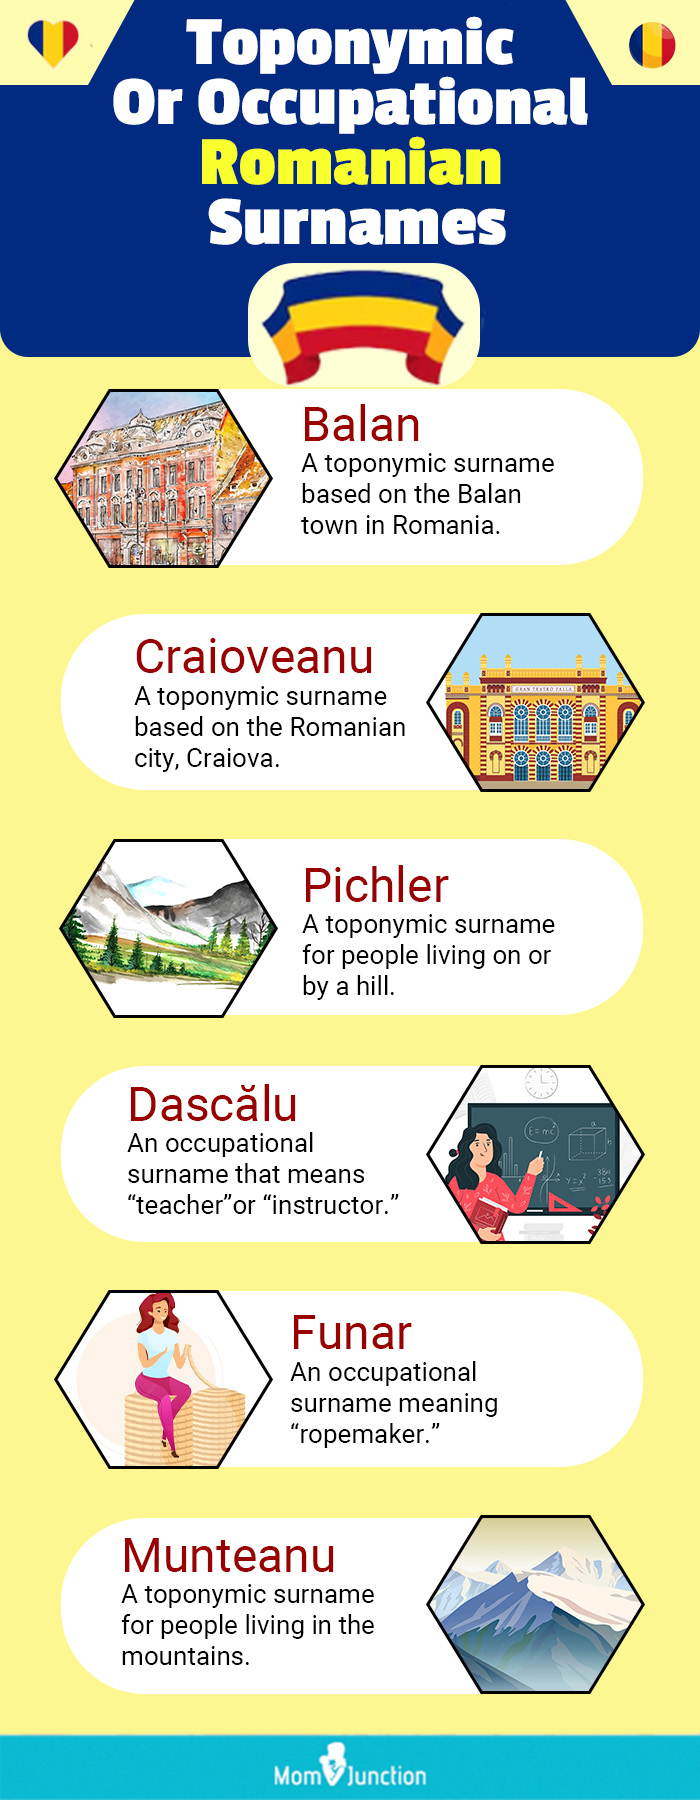 toponymic or occupational romanian surnames [infographic]